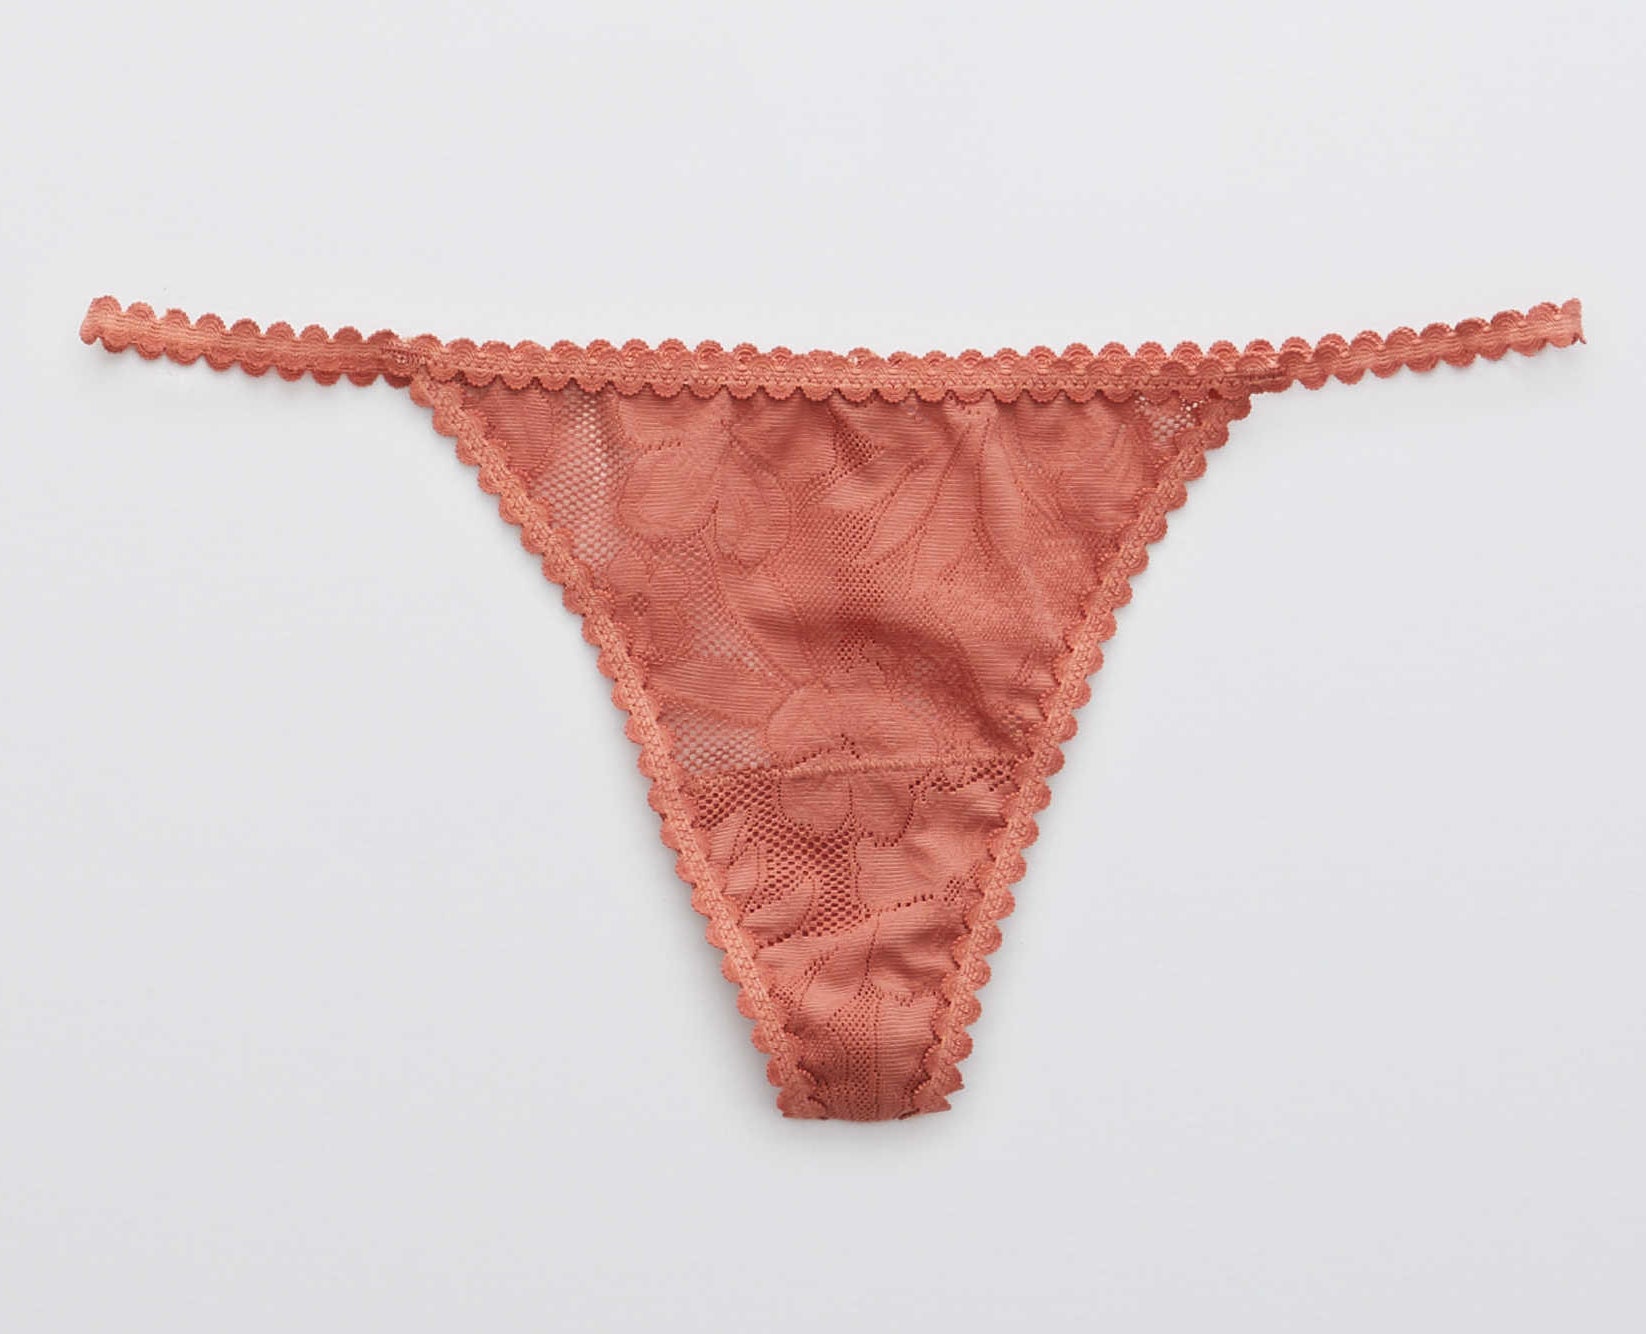 a terracotta colored thong made of floral lace with a sting back and sides